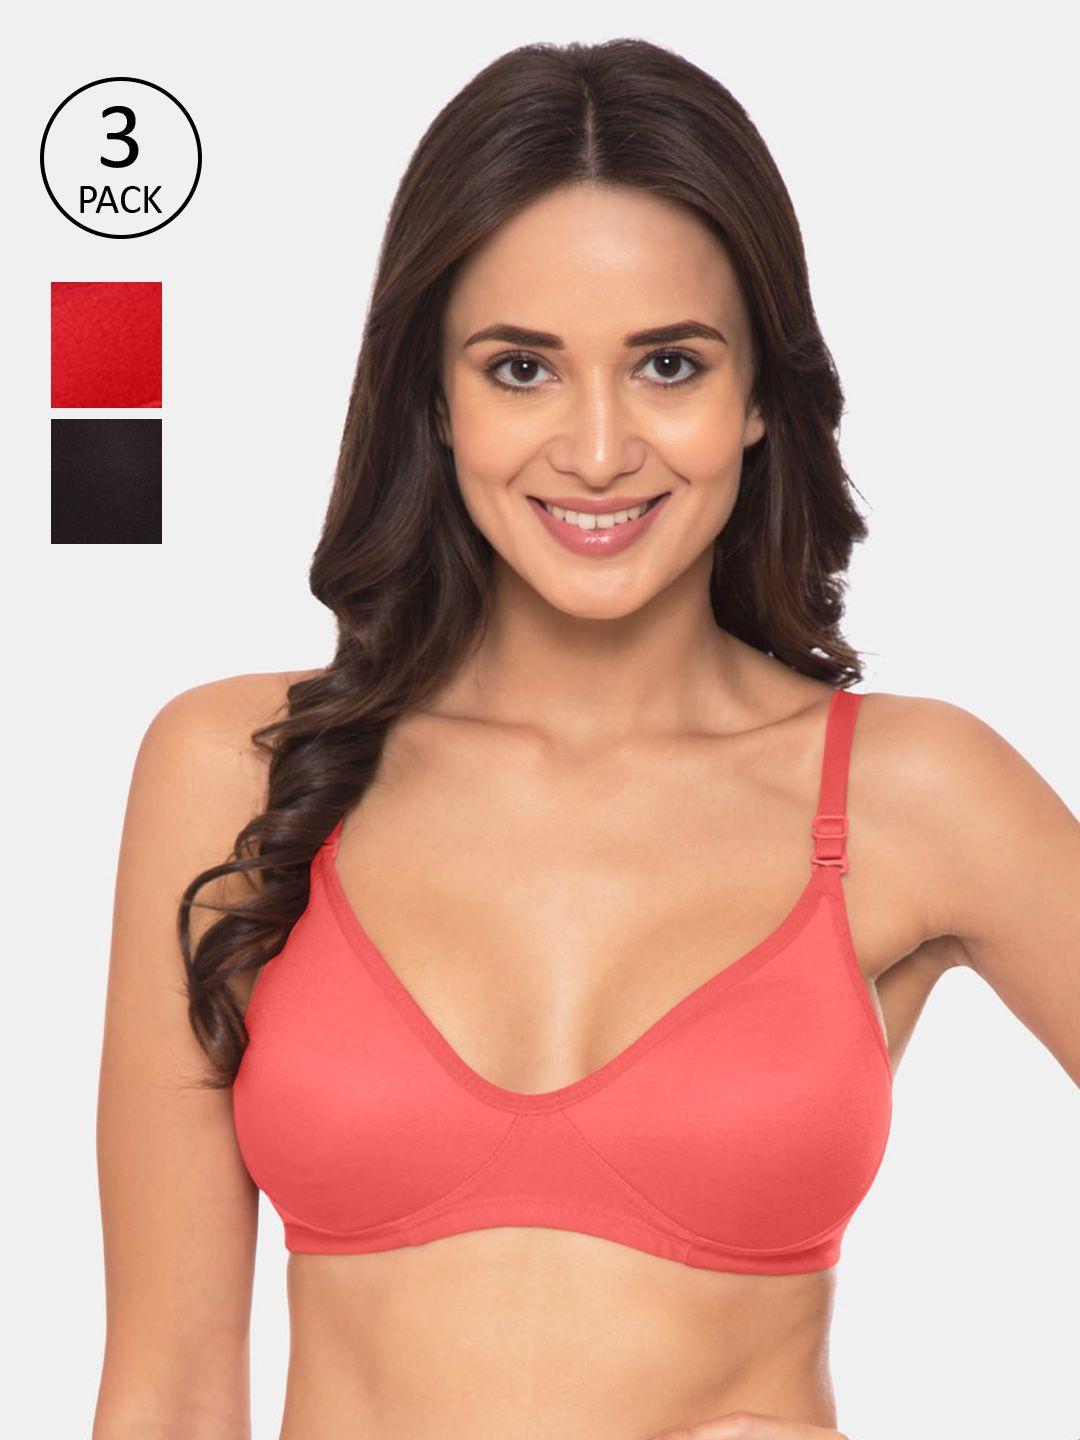 souminie-pack-of-3-solid-non-wired-non-padded-everyday-bras-s-133-crl-rd-blk-30b